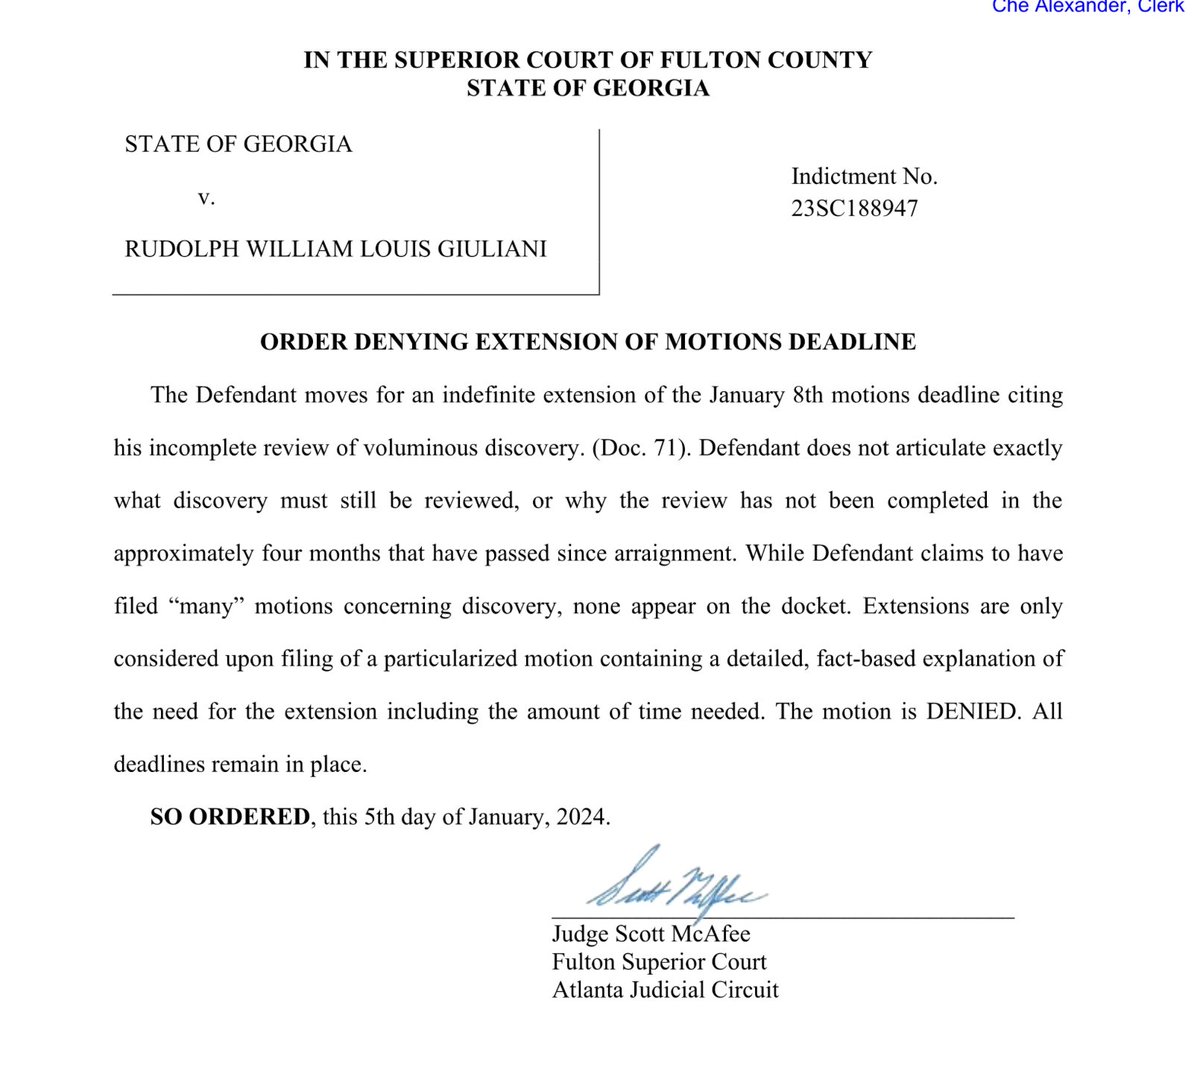 JUST IN: Judge Mcafee DENIES Rudy Giuliani's motion for extension of time to file pre-trial motions in Fulton County RICO case. The order follows a flurry of docket activity ahead of the upcoming Jan. 8 deadline for pre-trial motions.